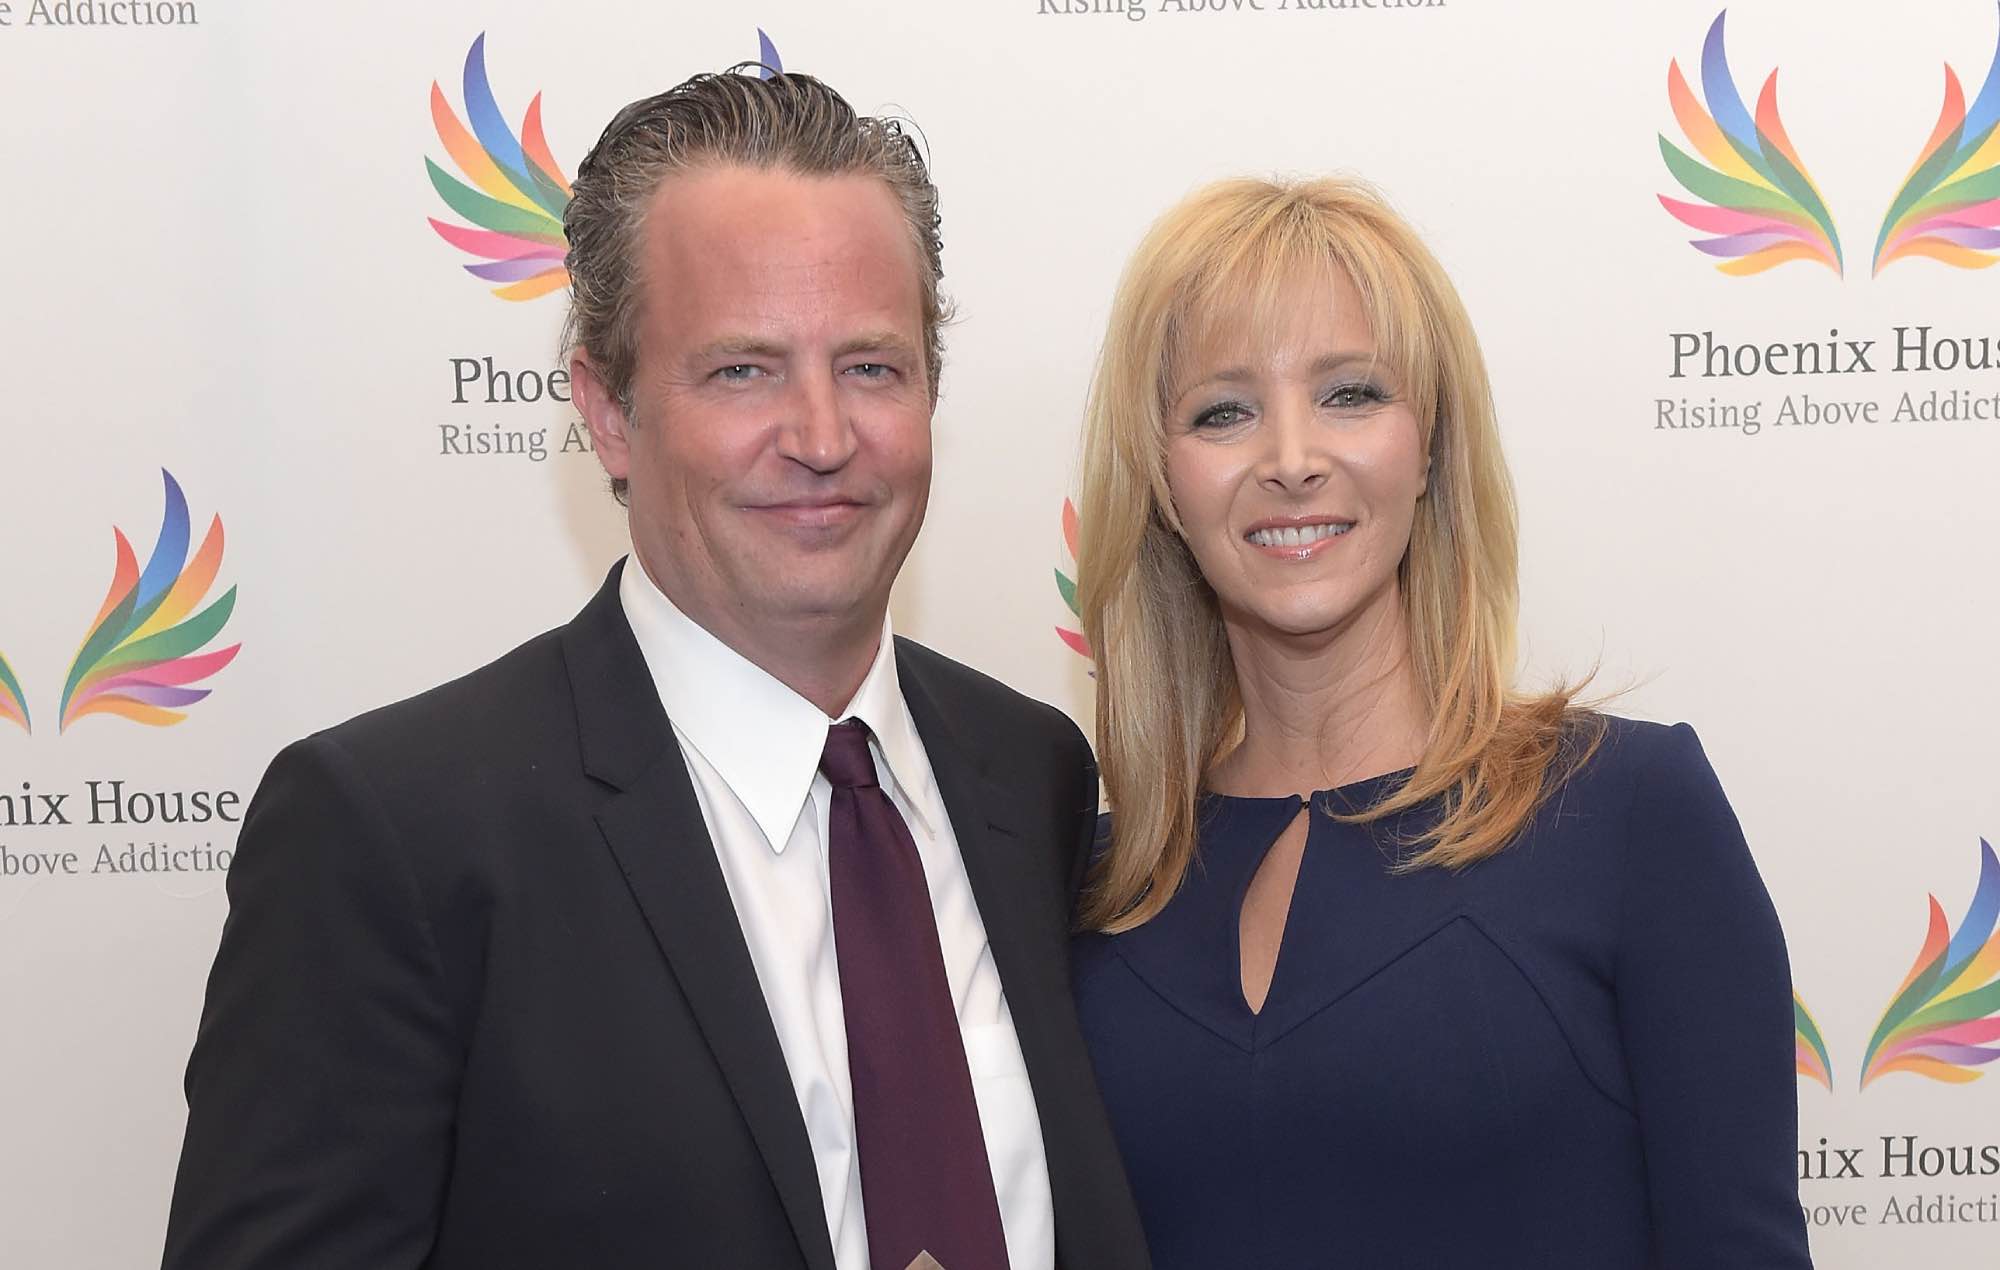 Lisa Kudrow rewatching ‘Friends’ “to remember” late co-star Matthew Perry